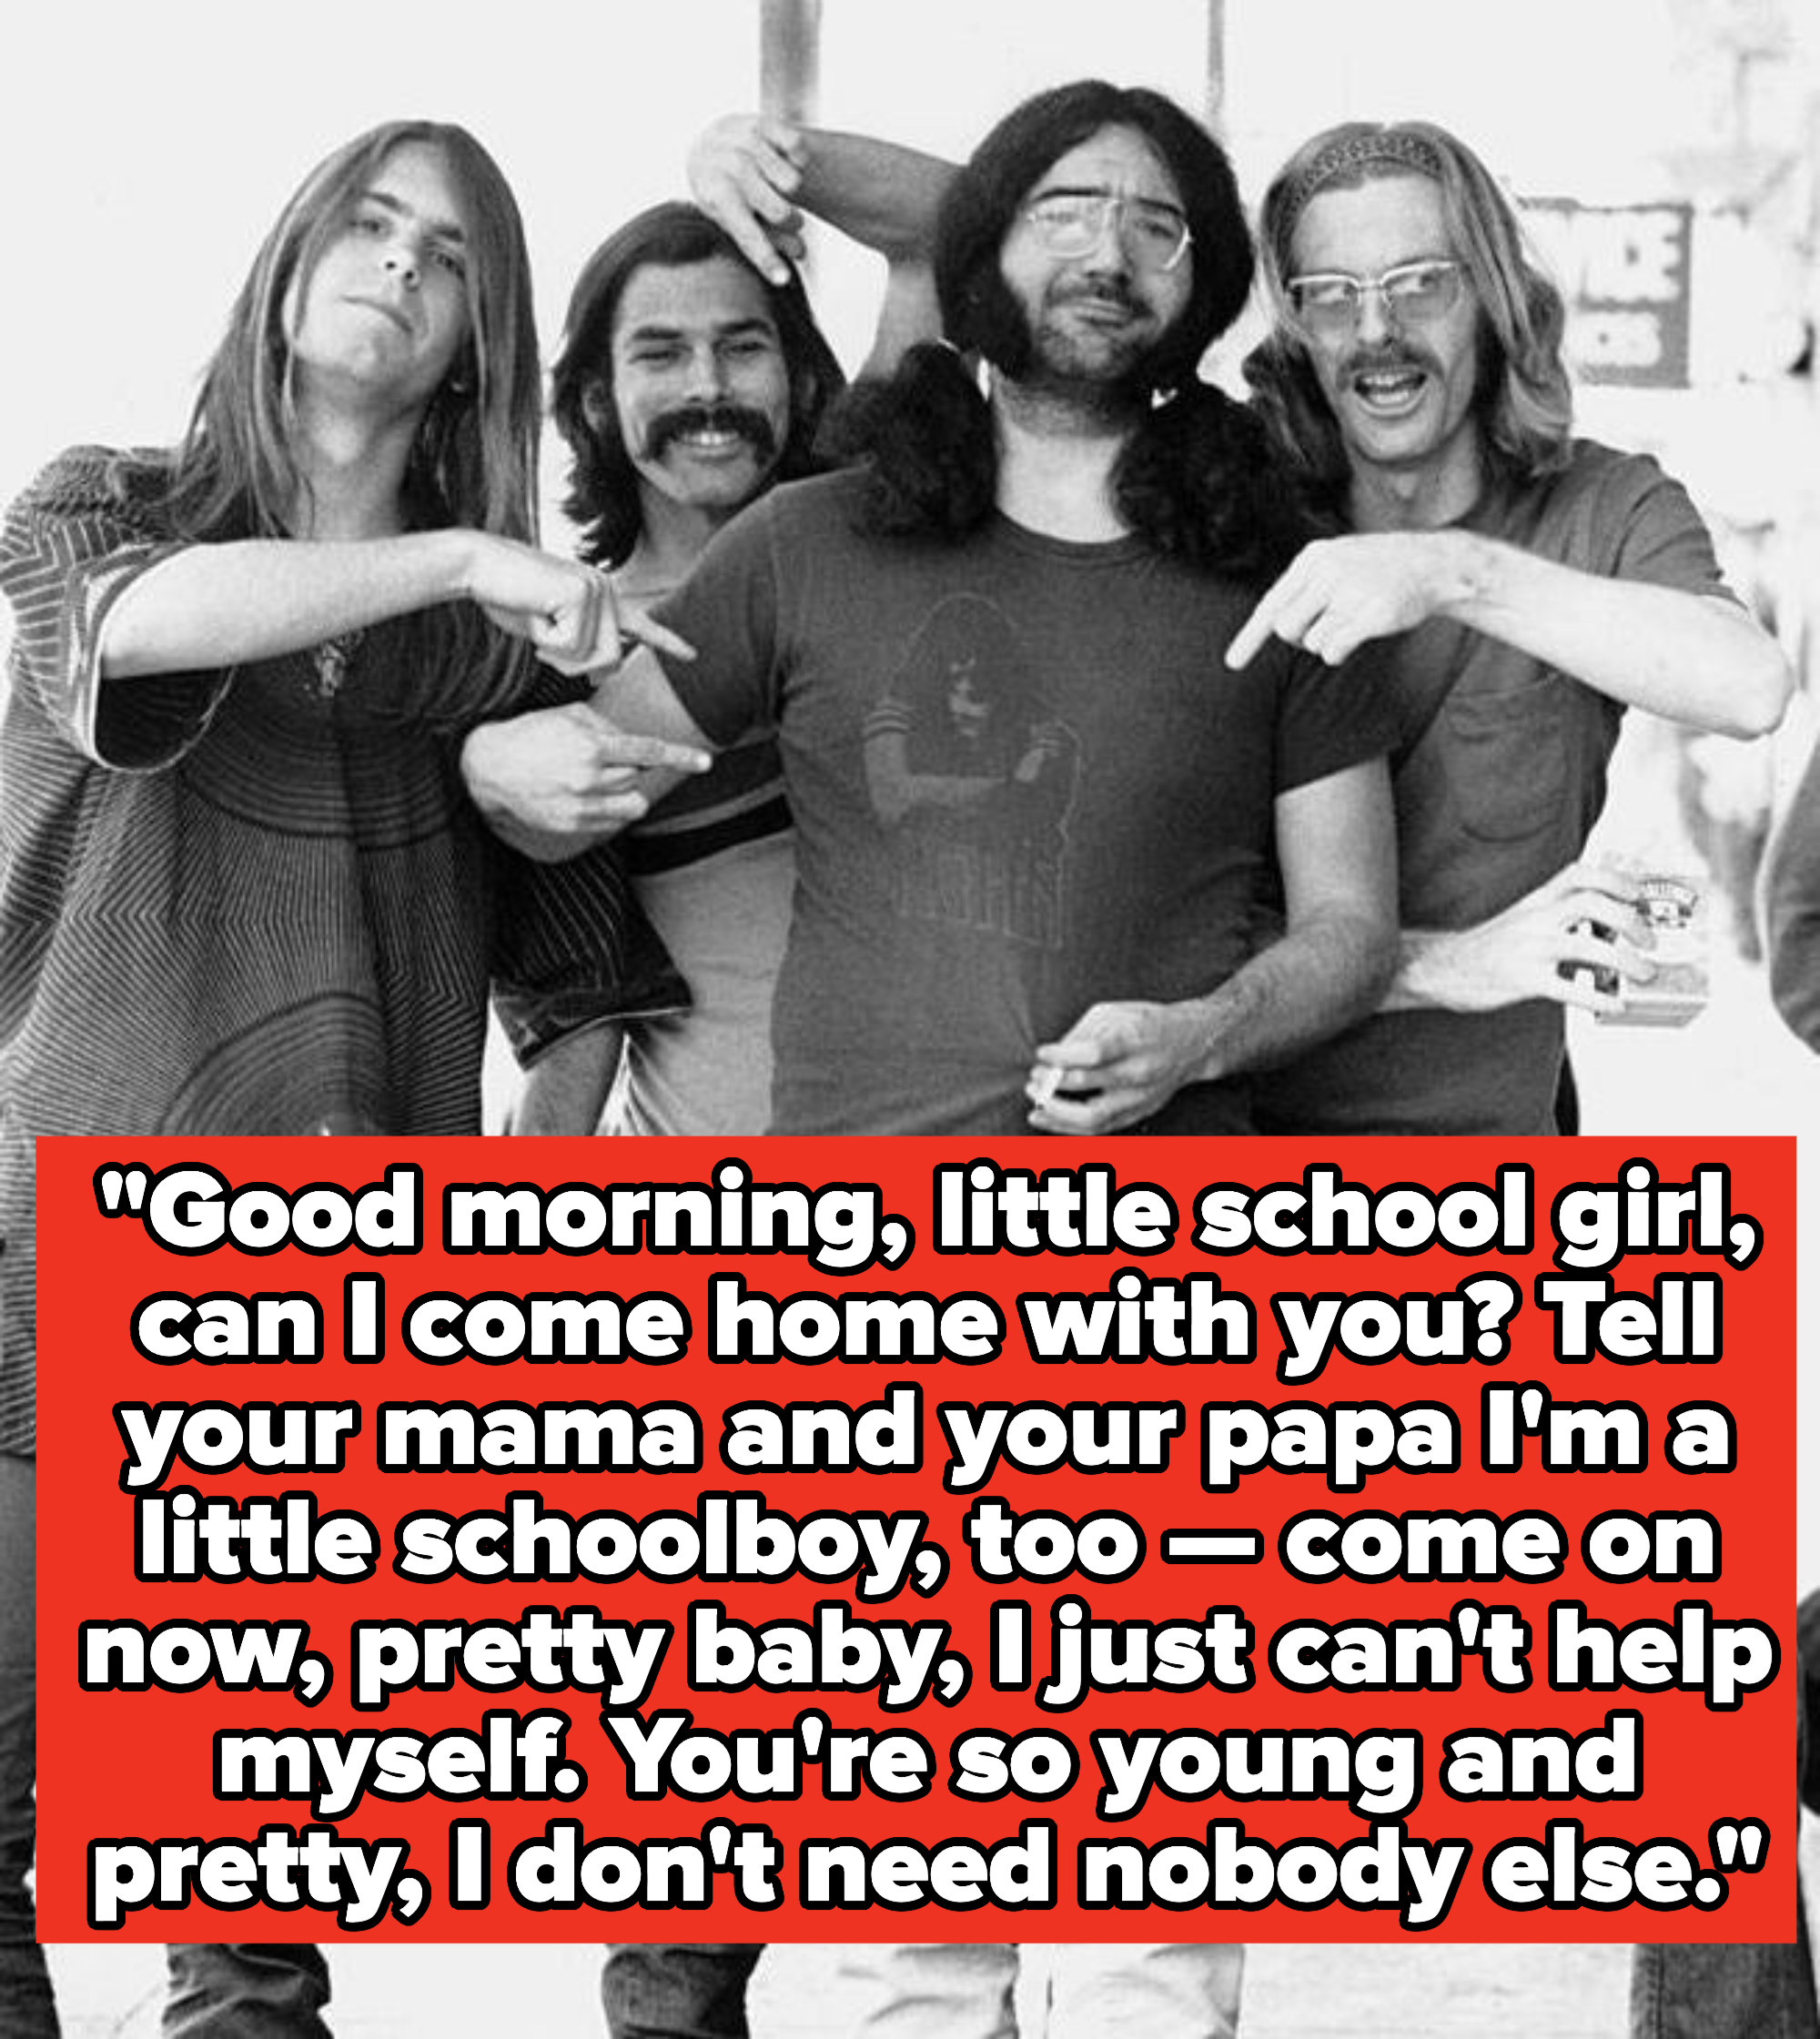 Grateful Dead lyrics: &quot;&quot;Good morning, little school girl, can I come home with you? Tell your mama and your papa I&#x27;m a little schoolboy, too — come on now, pretty baby, I just can&#x27;t help myself. You&#x27;re so young and pretty, I don&#x27;t need nobody else&quot;